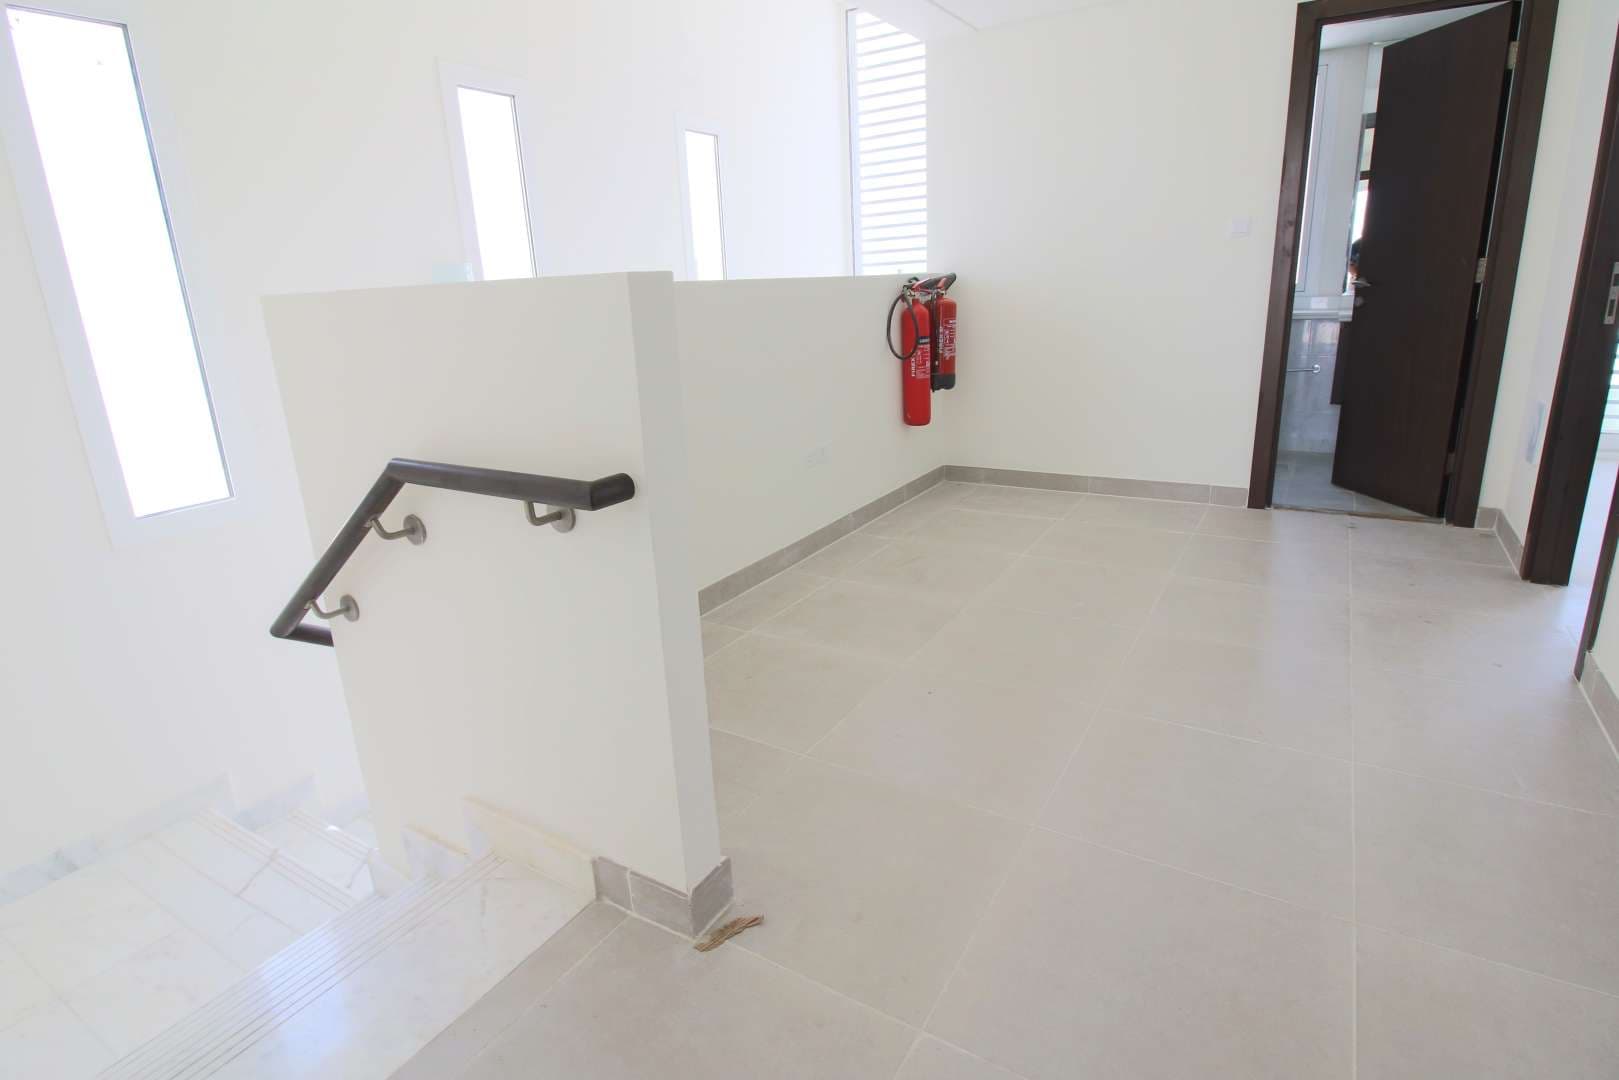 3 Bedroom Townhouse For Rent Arabella Townhouses Lp08006 1f6a27caa2054700.jpg